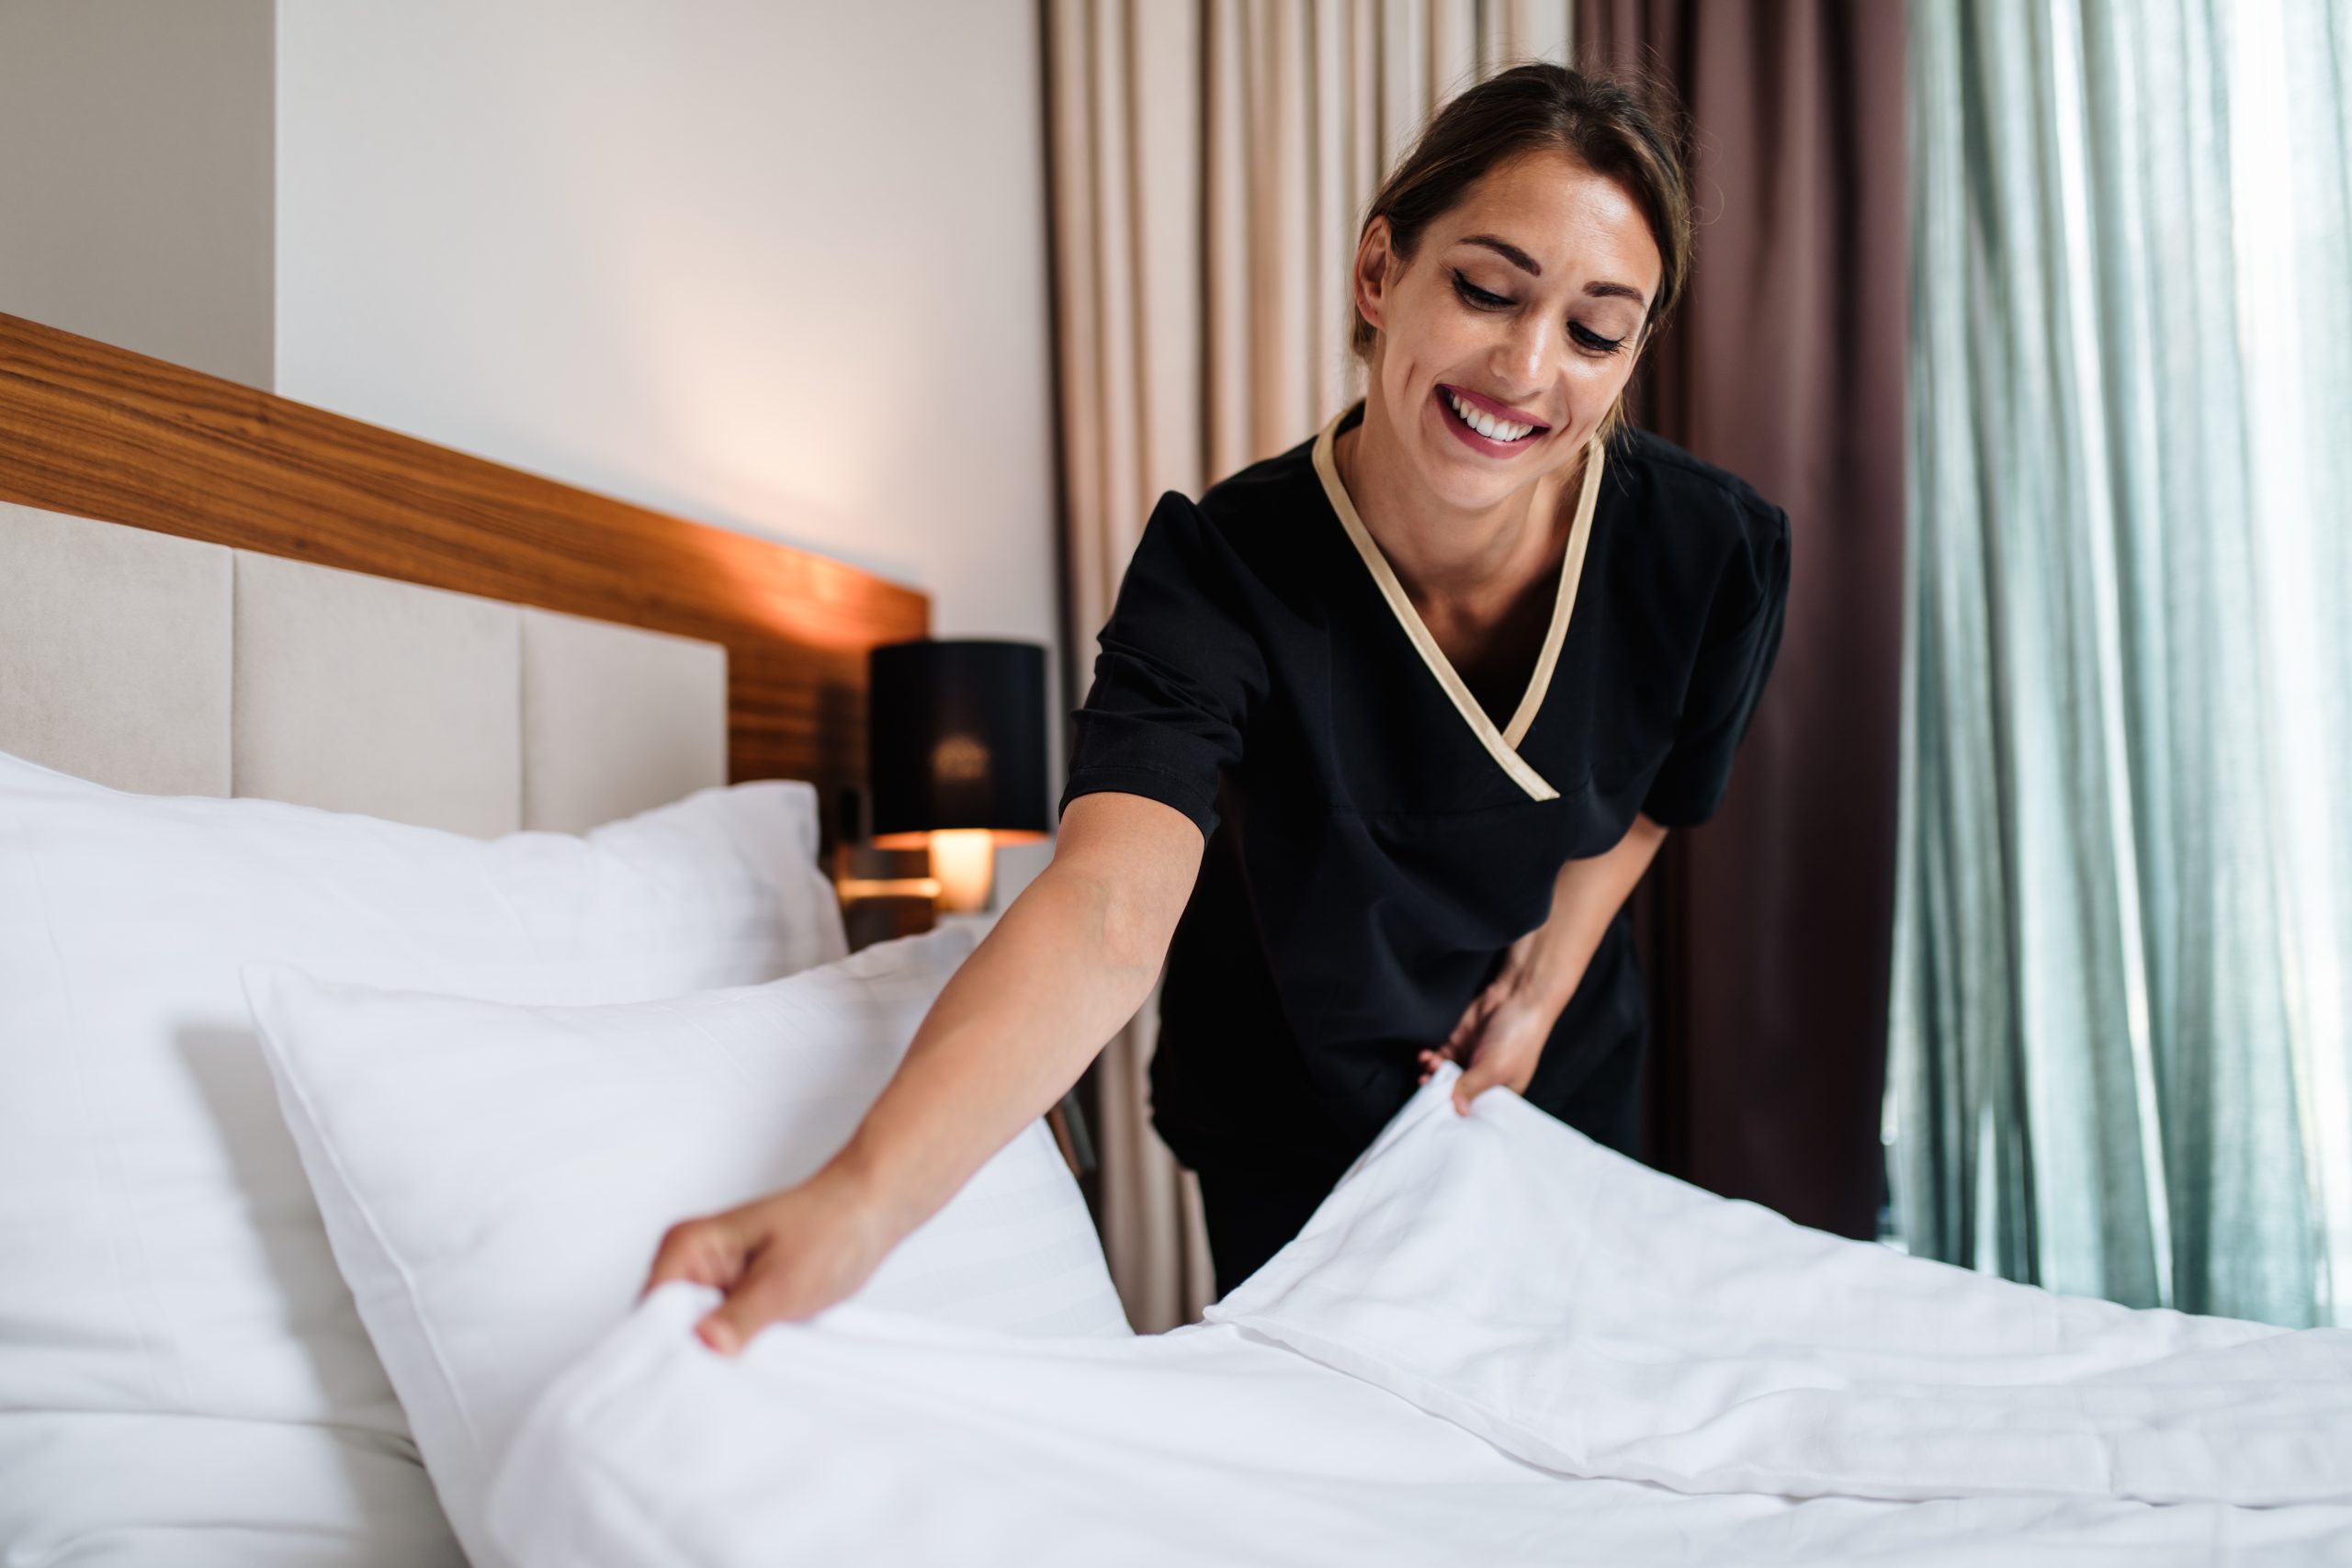 What are the benefits of hiring a maid service?